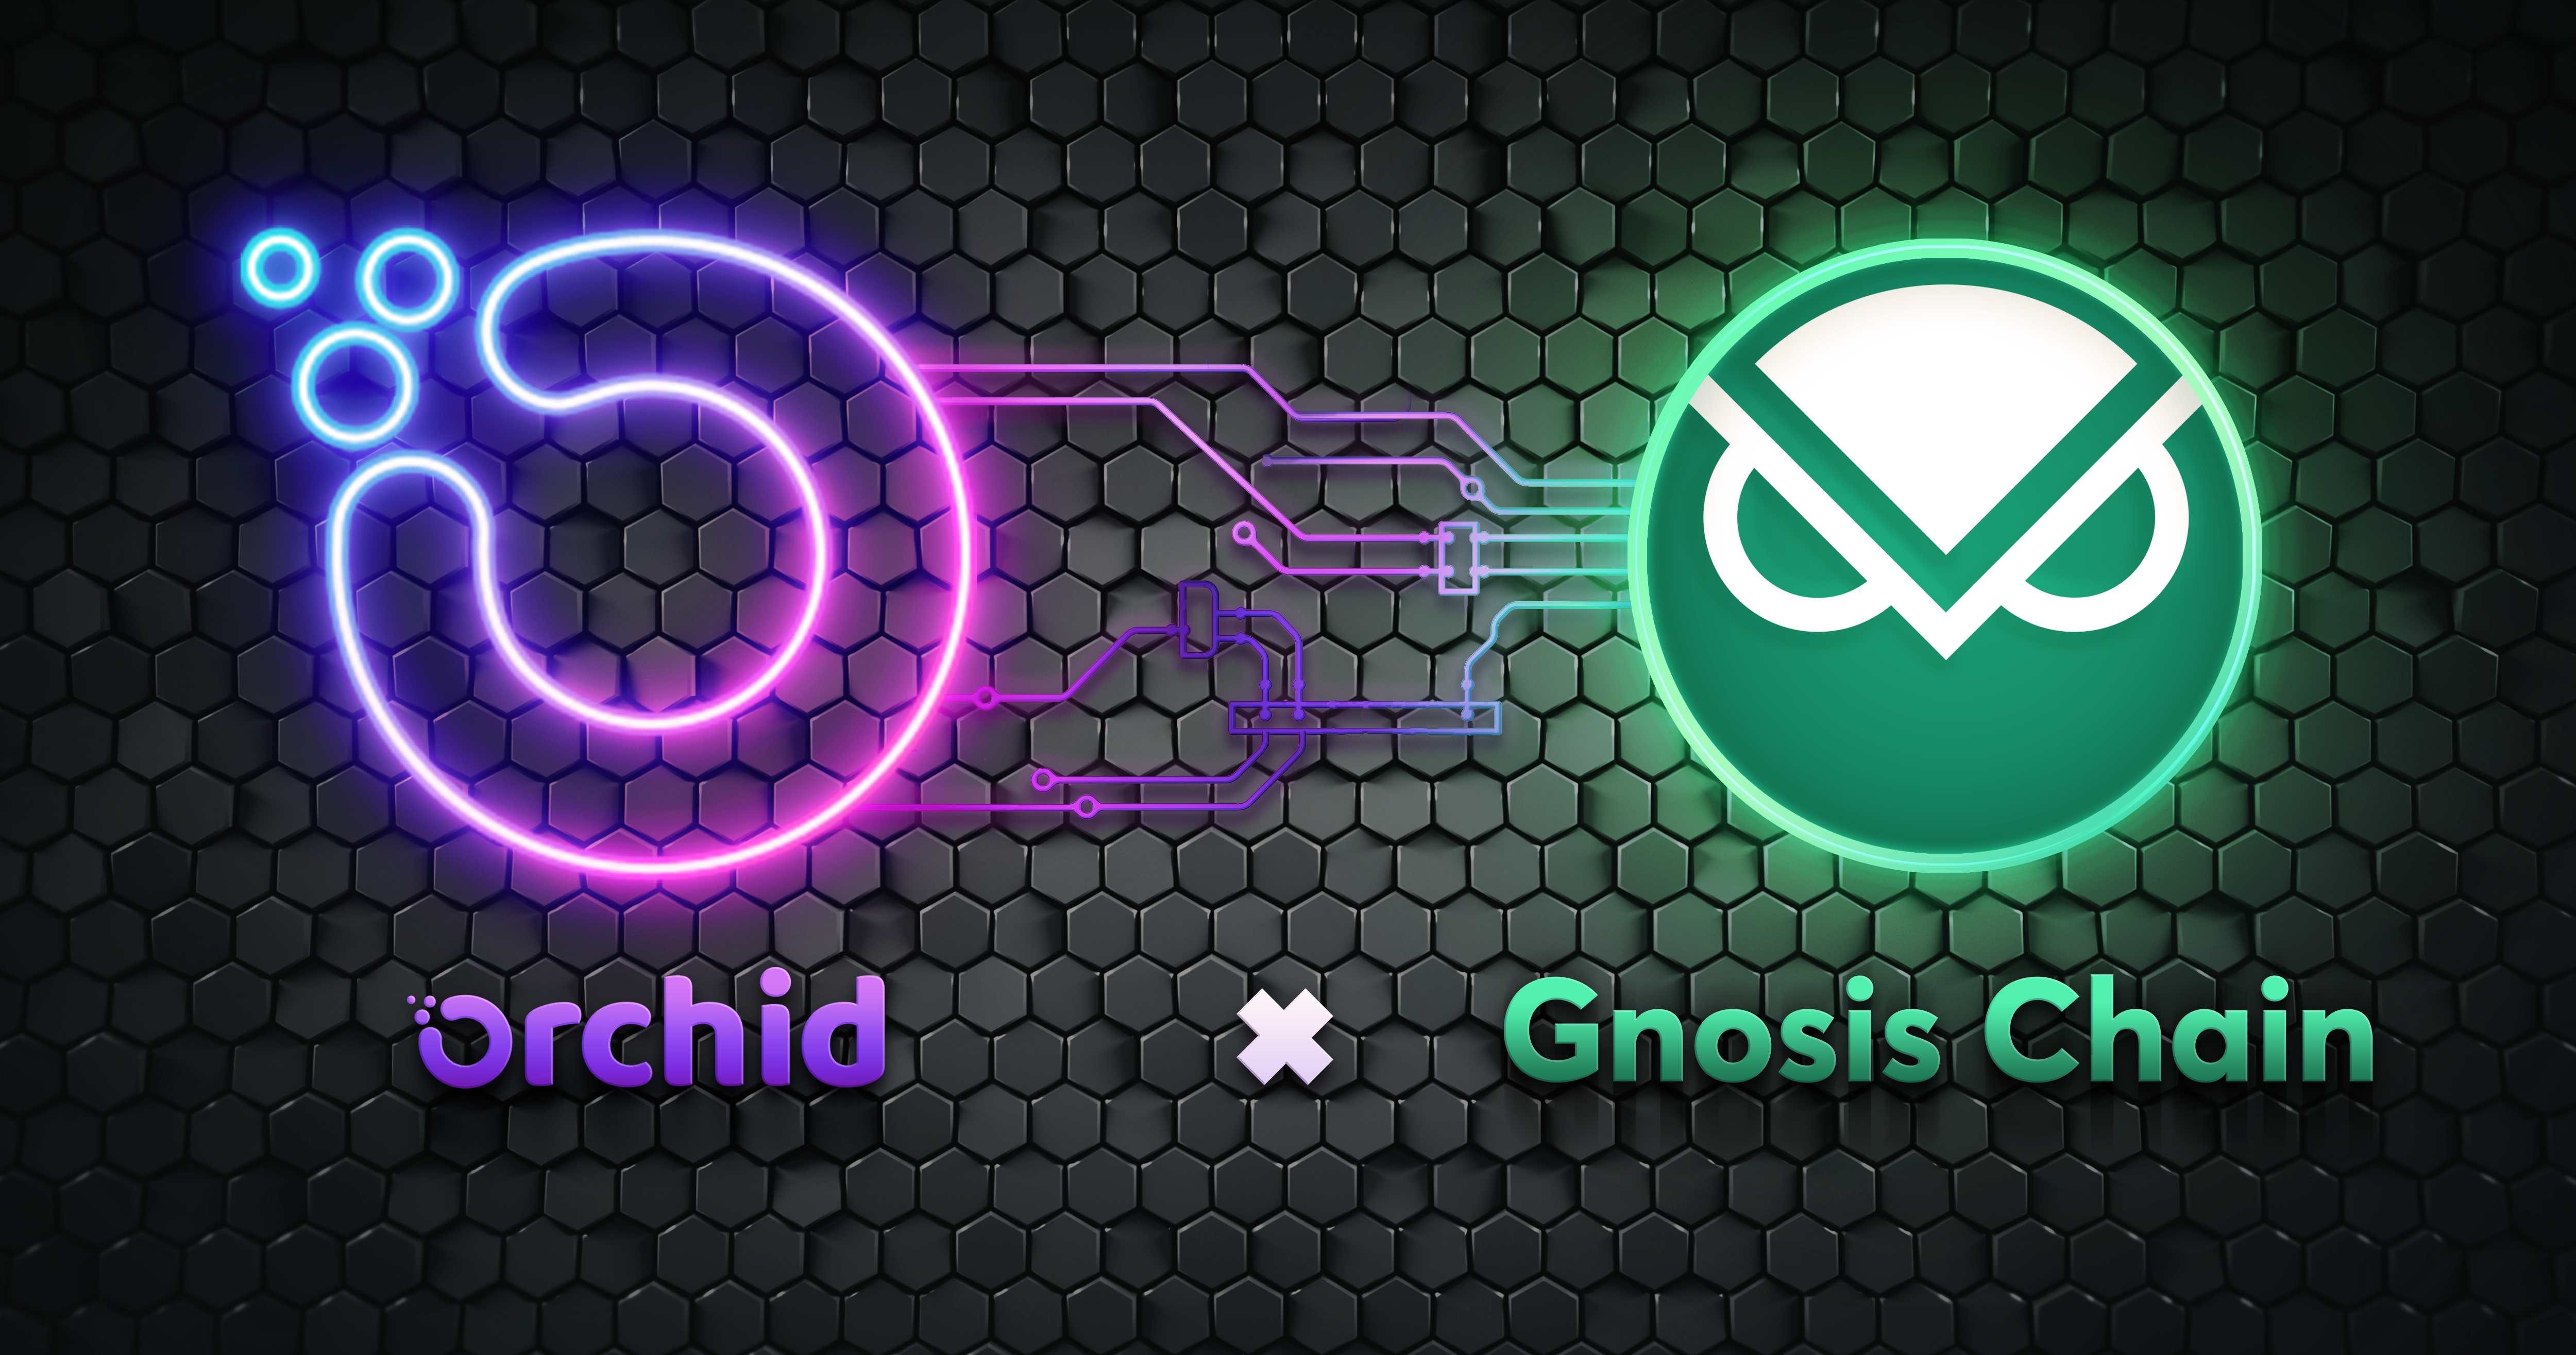 Welcome to Orchid, Gnosis Frens!